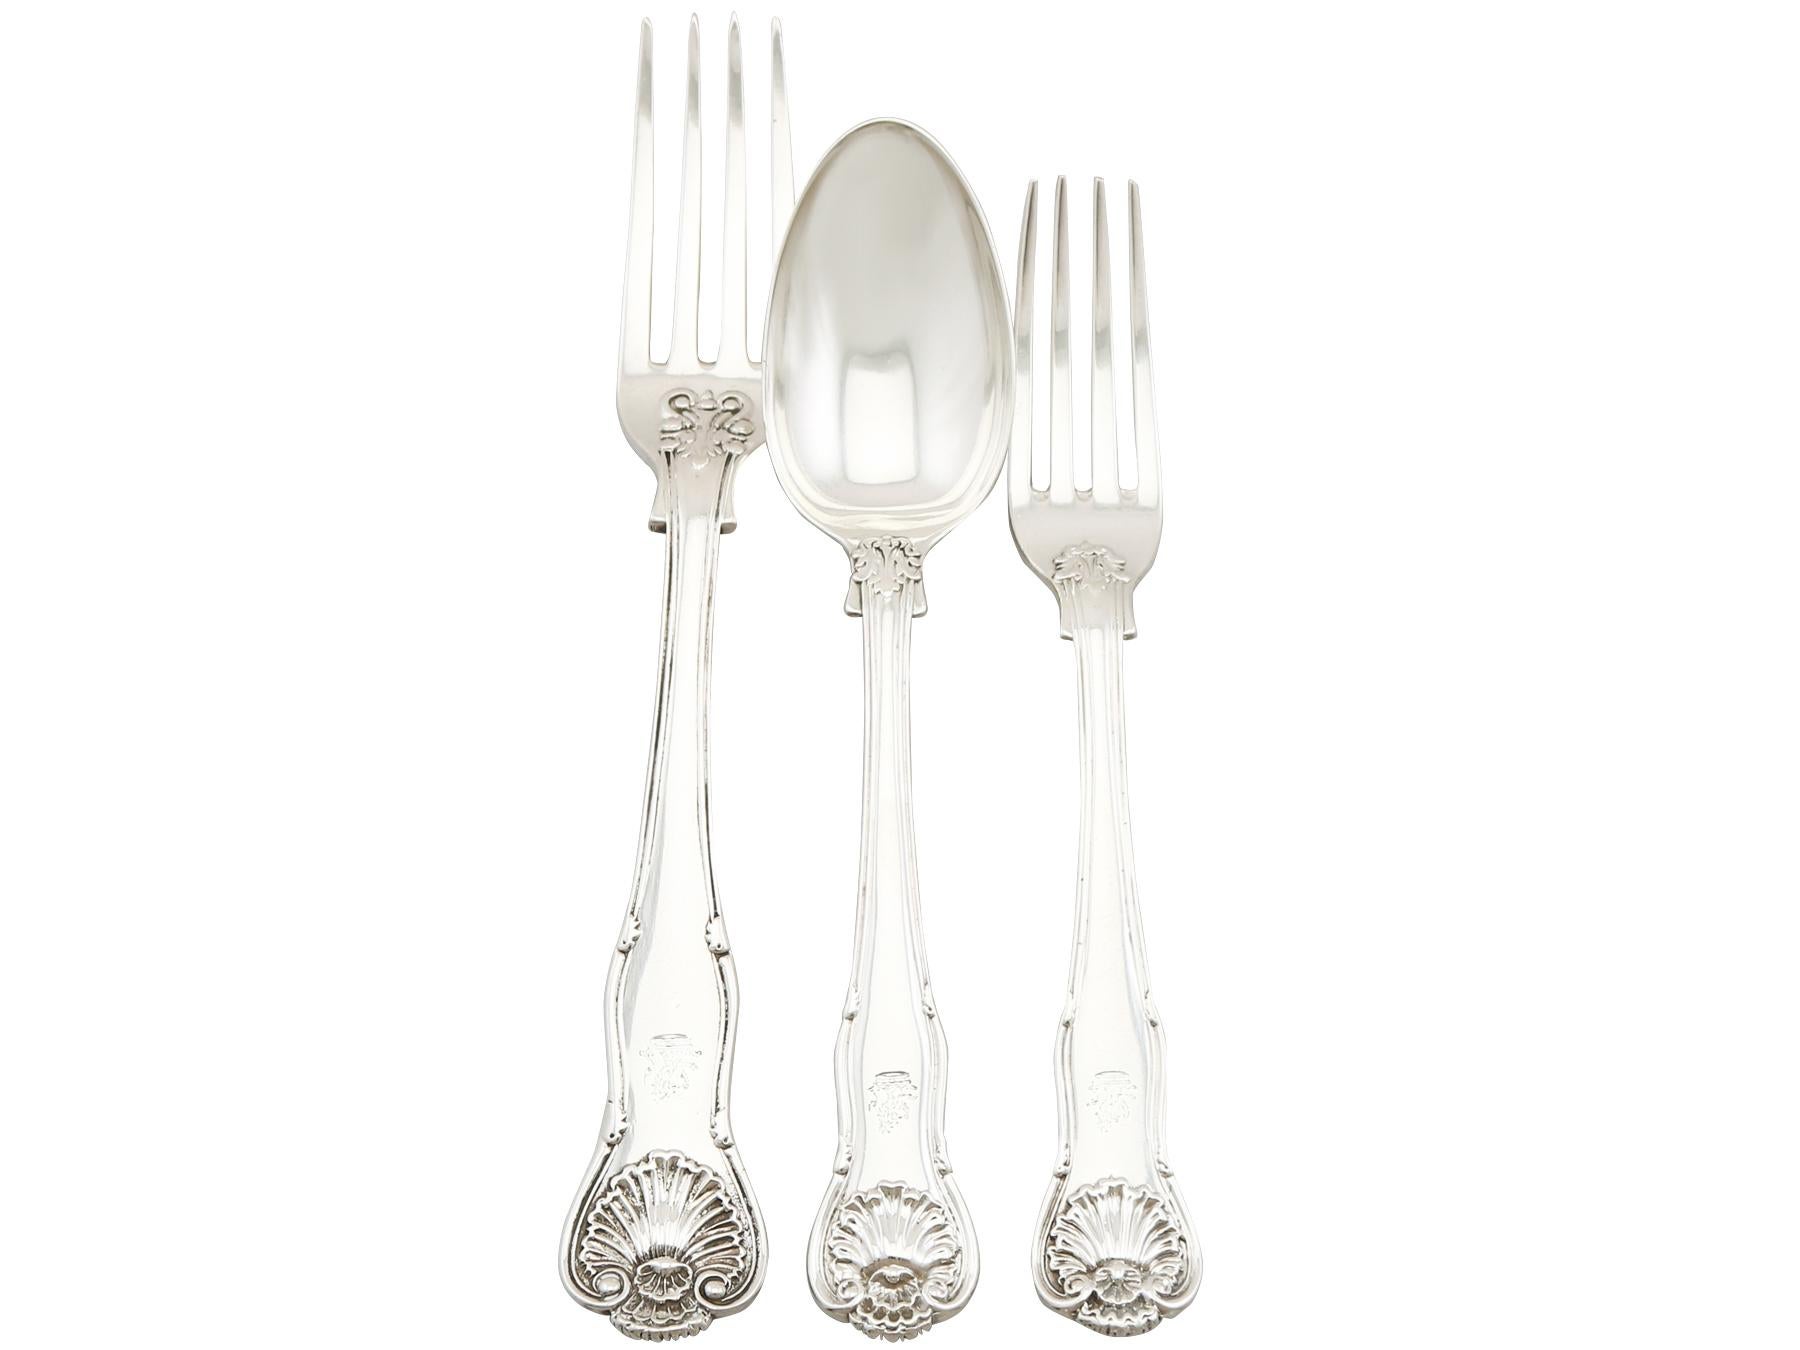 An exceptional, fine and impressive antique English sterling silver King's Husk pattern flatware service for 12 persons; an addition to our canteen of cutlery collection.

The pieces of this fine, antique sterling silver flatware set for 12